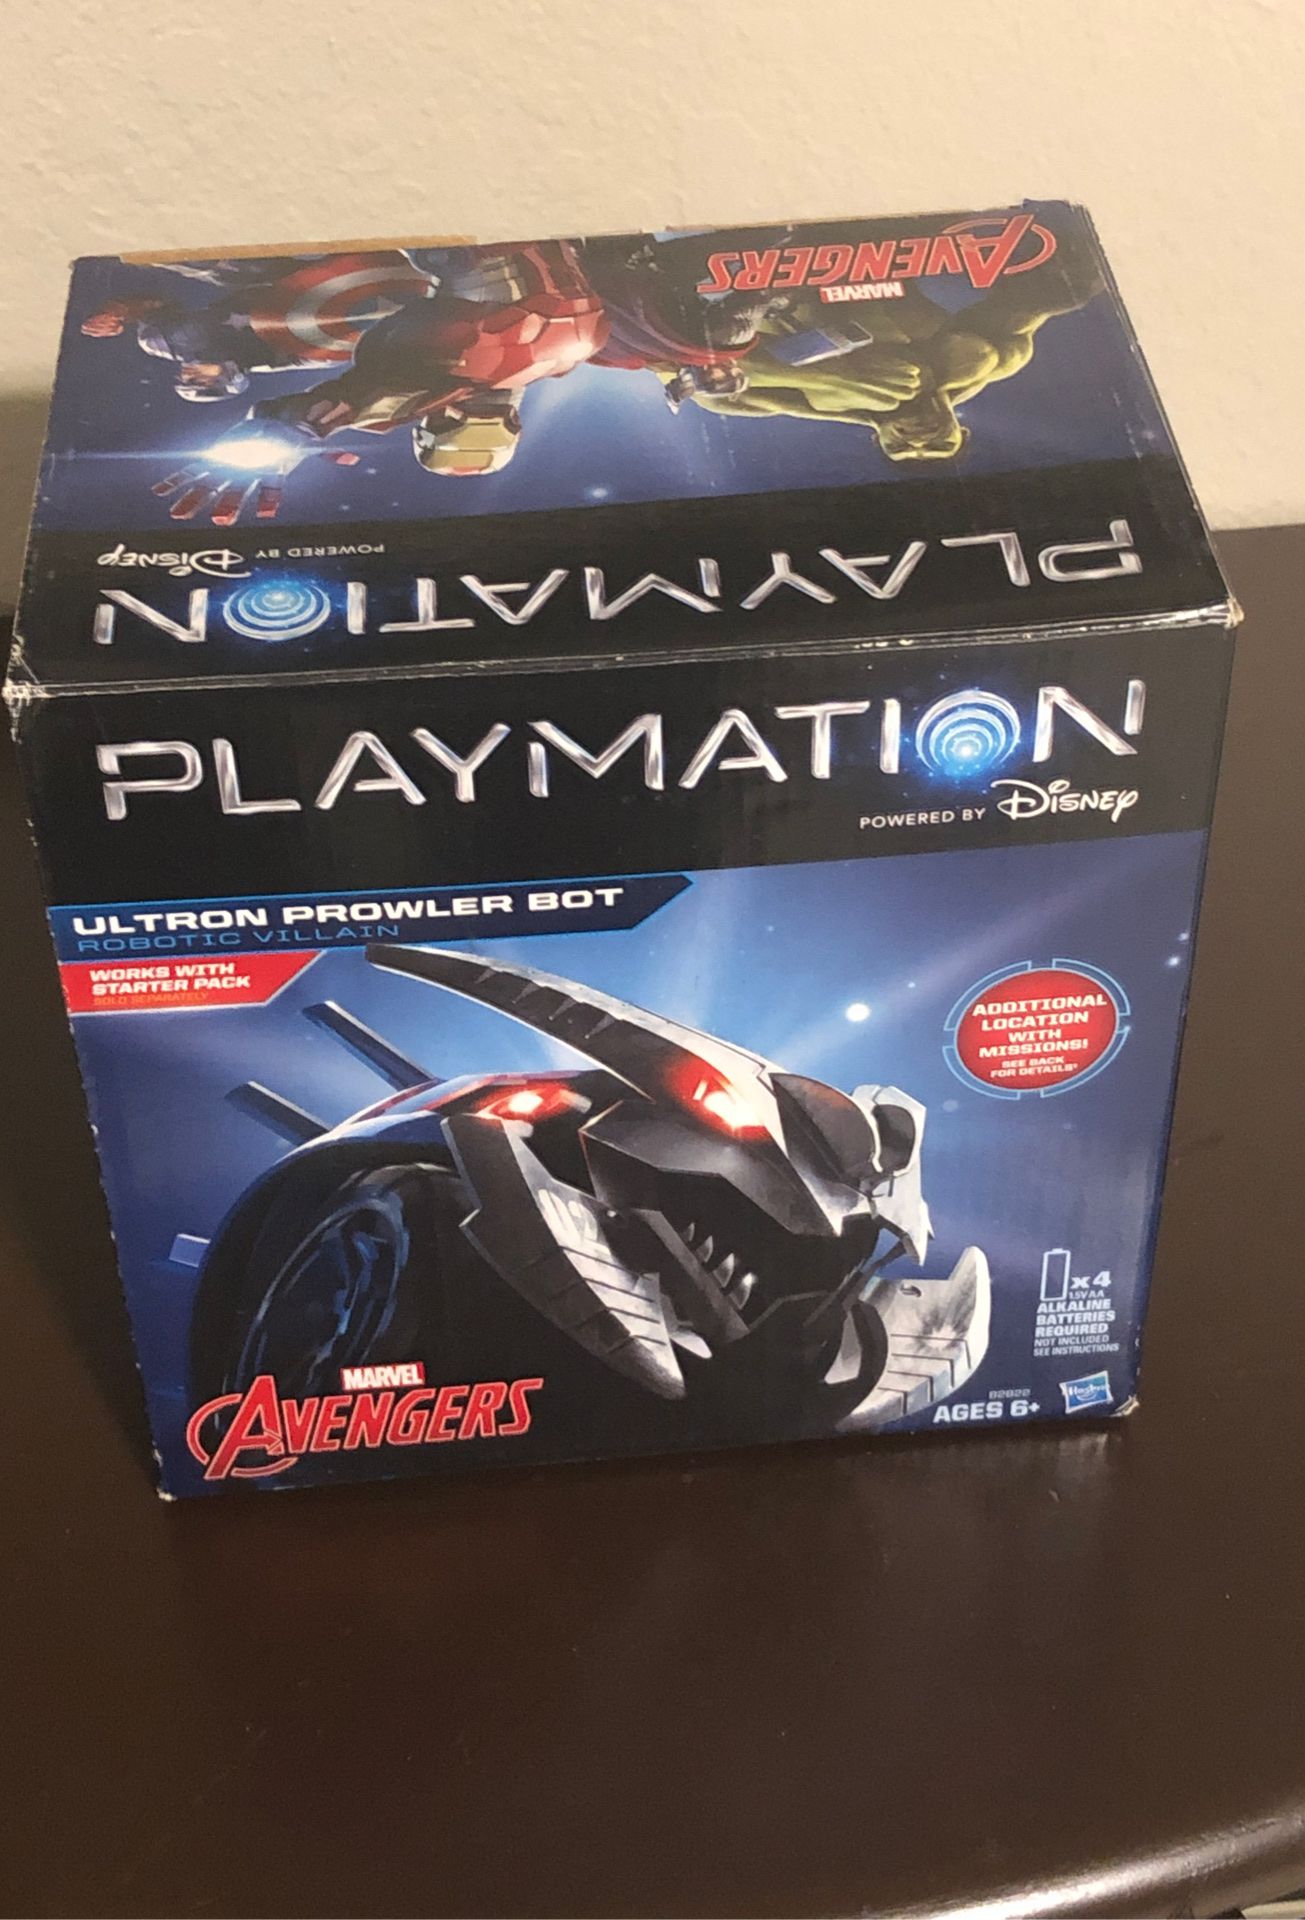 (NEW) Disney Playmation (ultron prowler bot) AVENGERS by Marvel